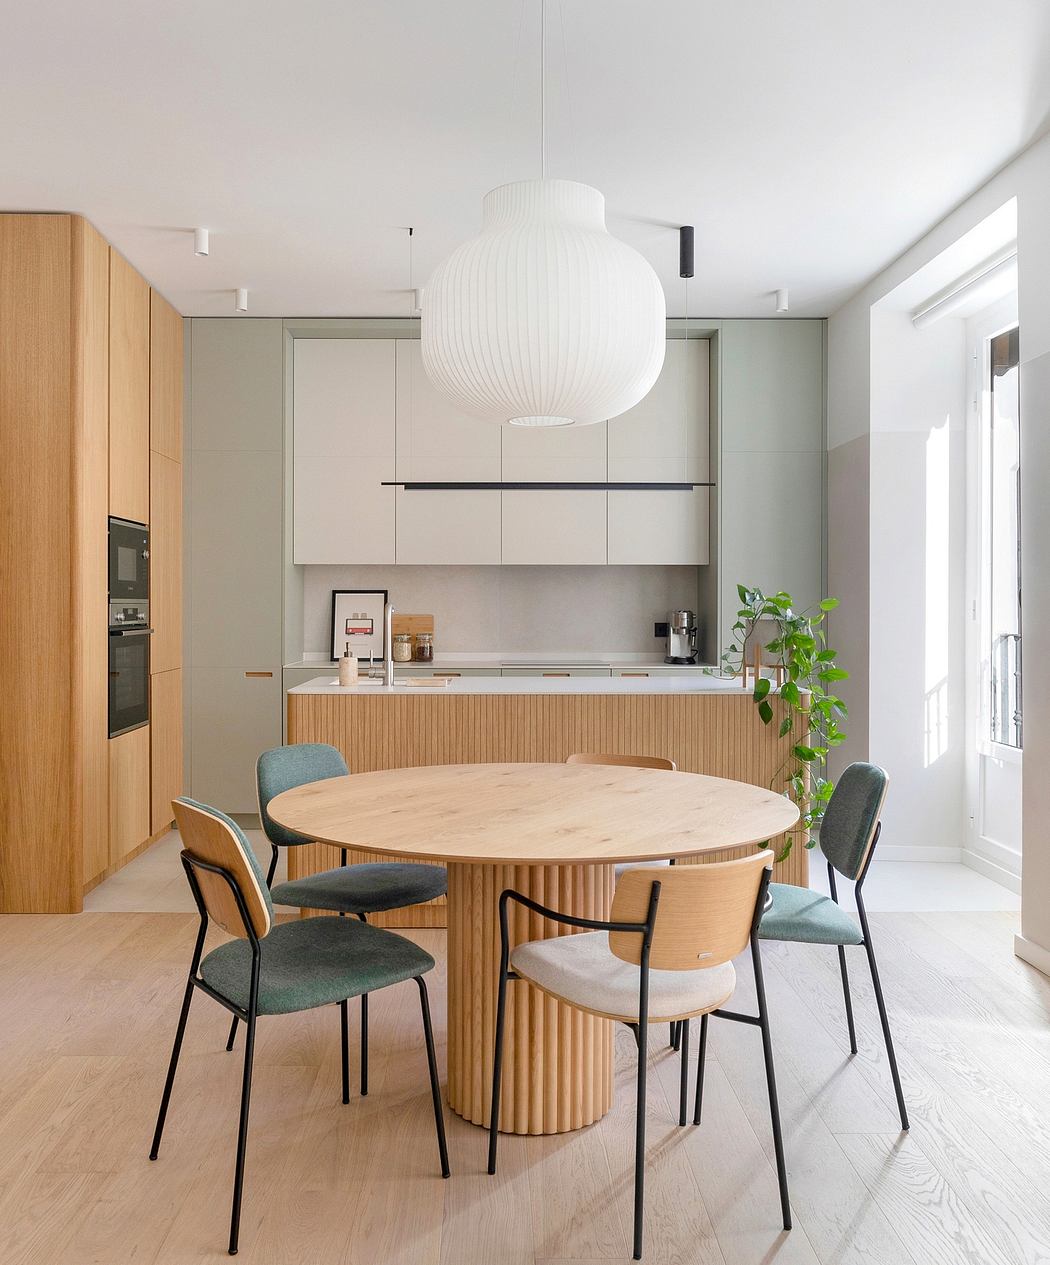 A modern, open-concept kitchen and dining area with a round wooden table, upholstered chairs, and a sculptural pendant lamp.